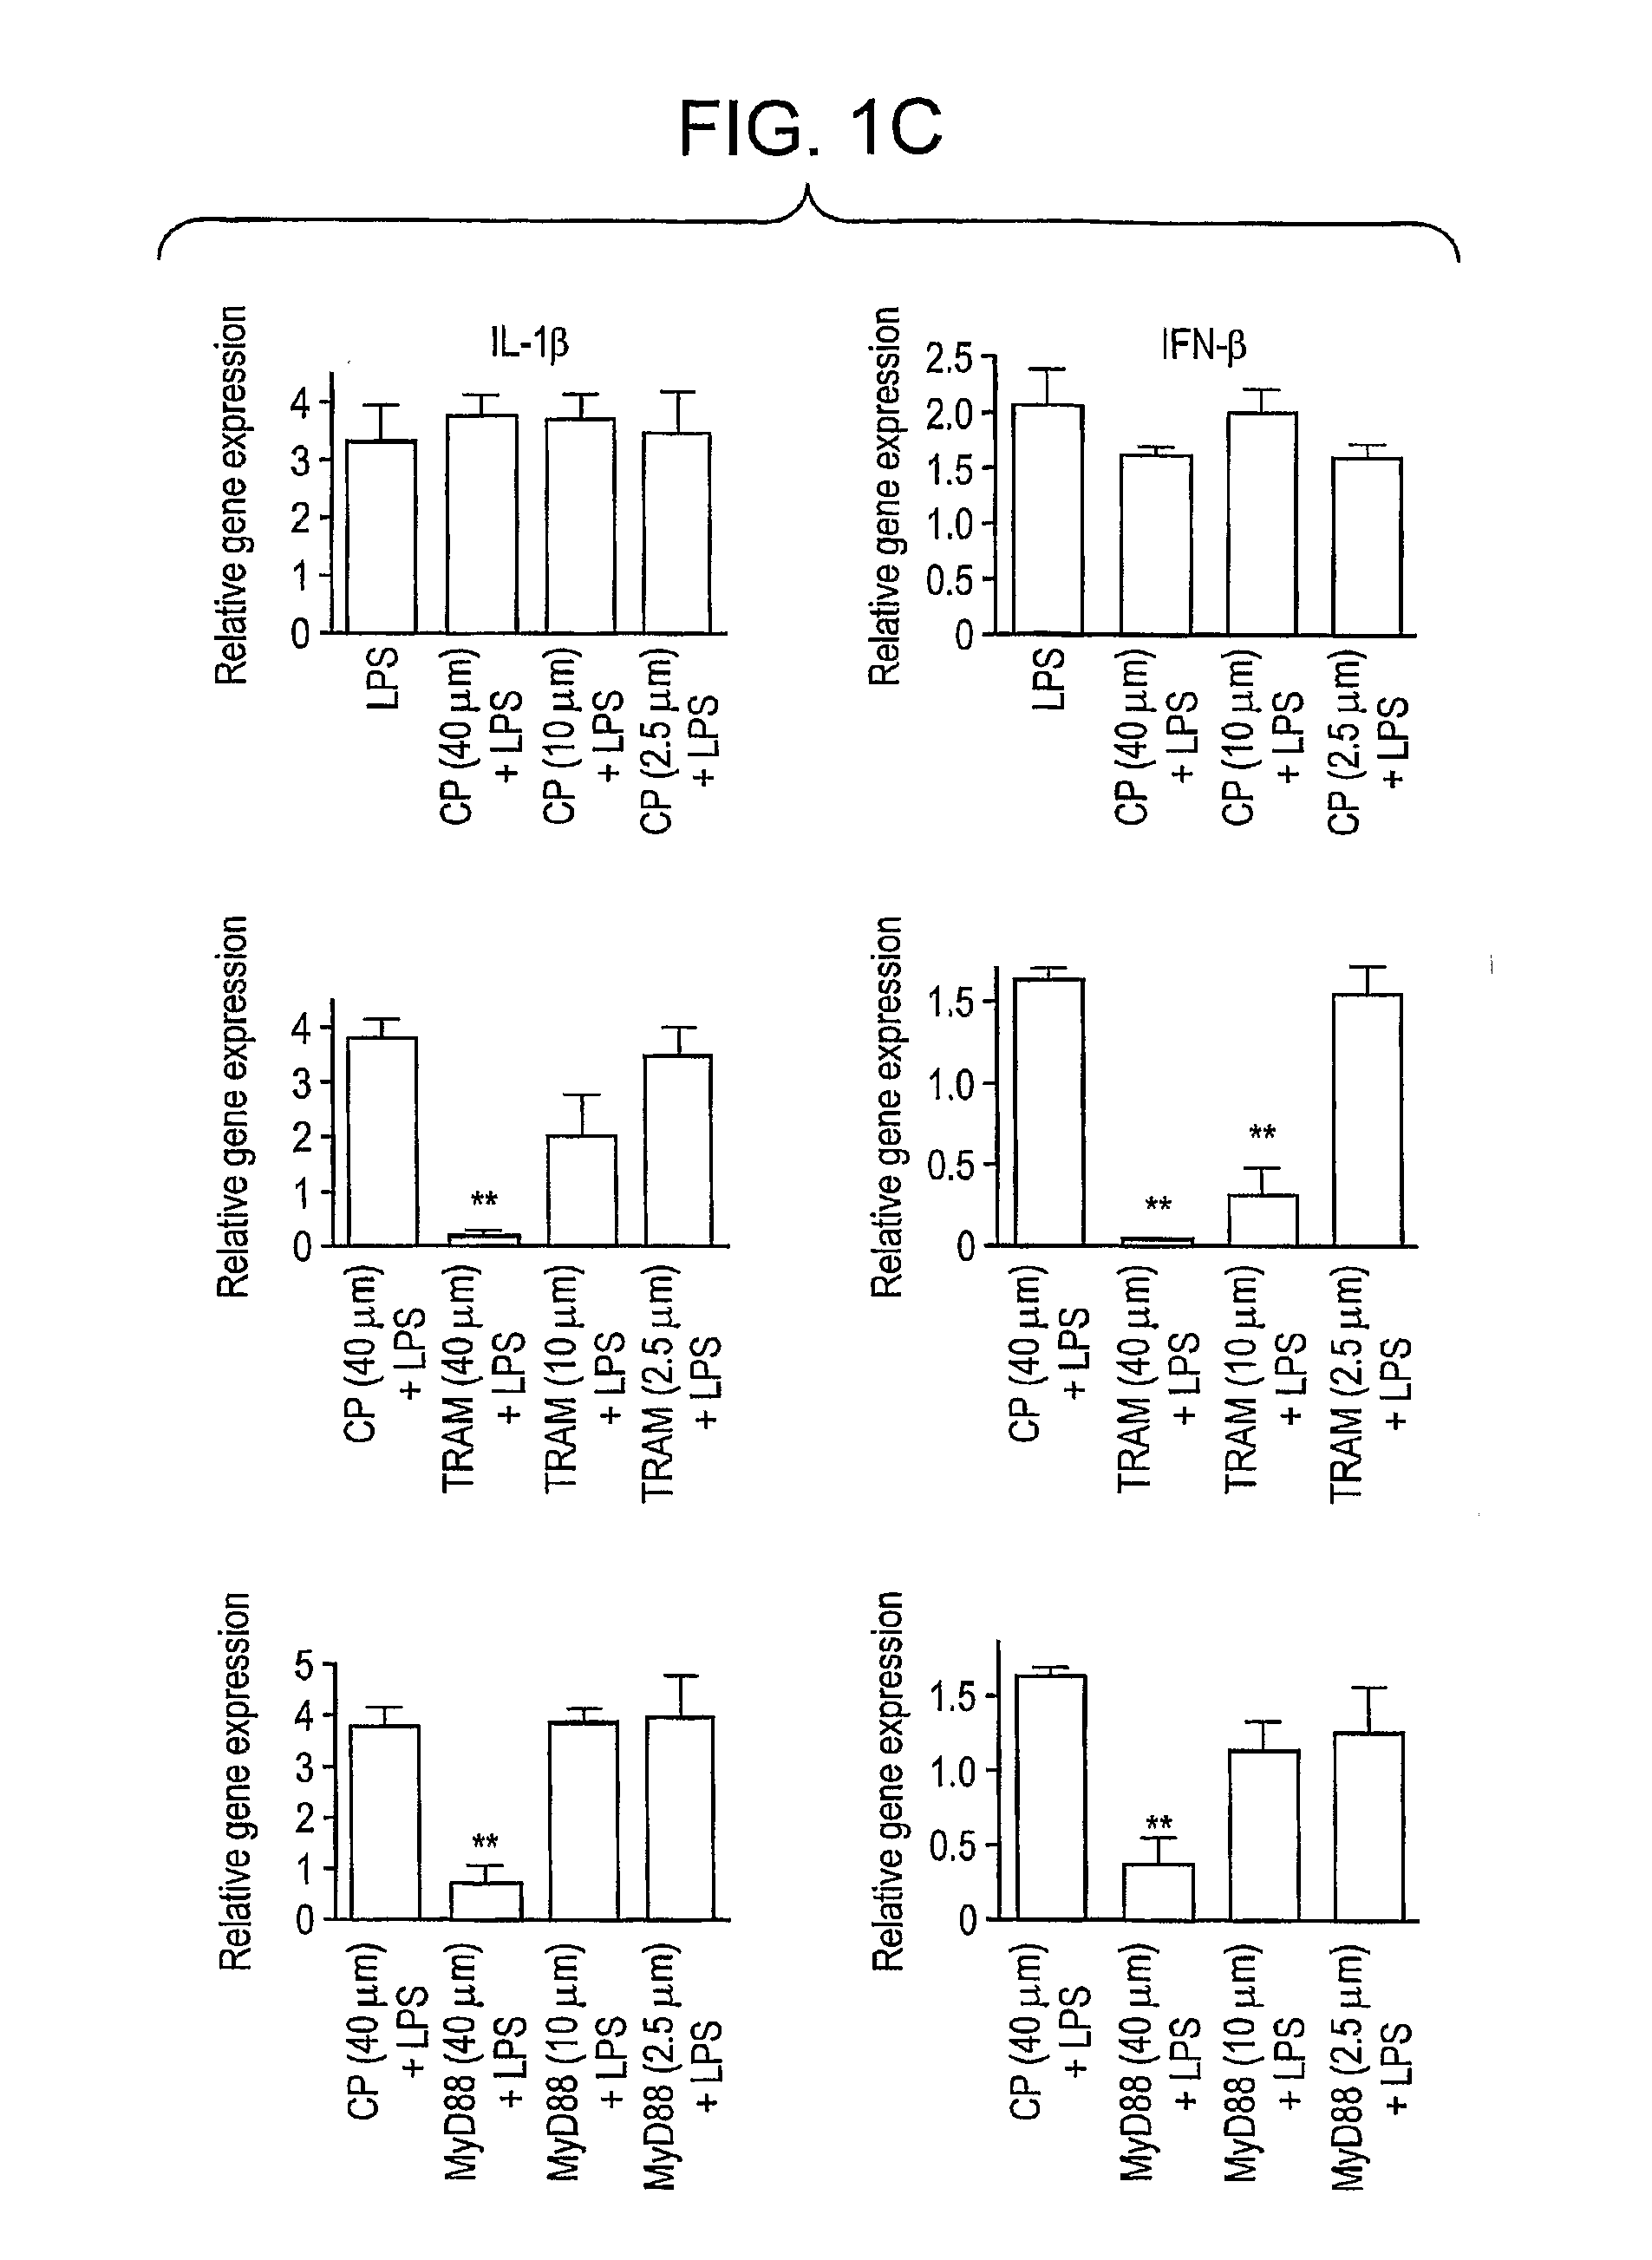 Selective Inhibition of TLR4 Signaling